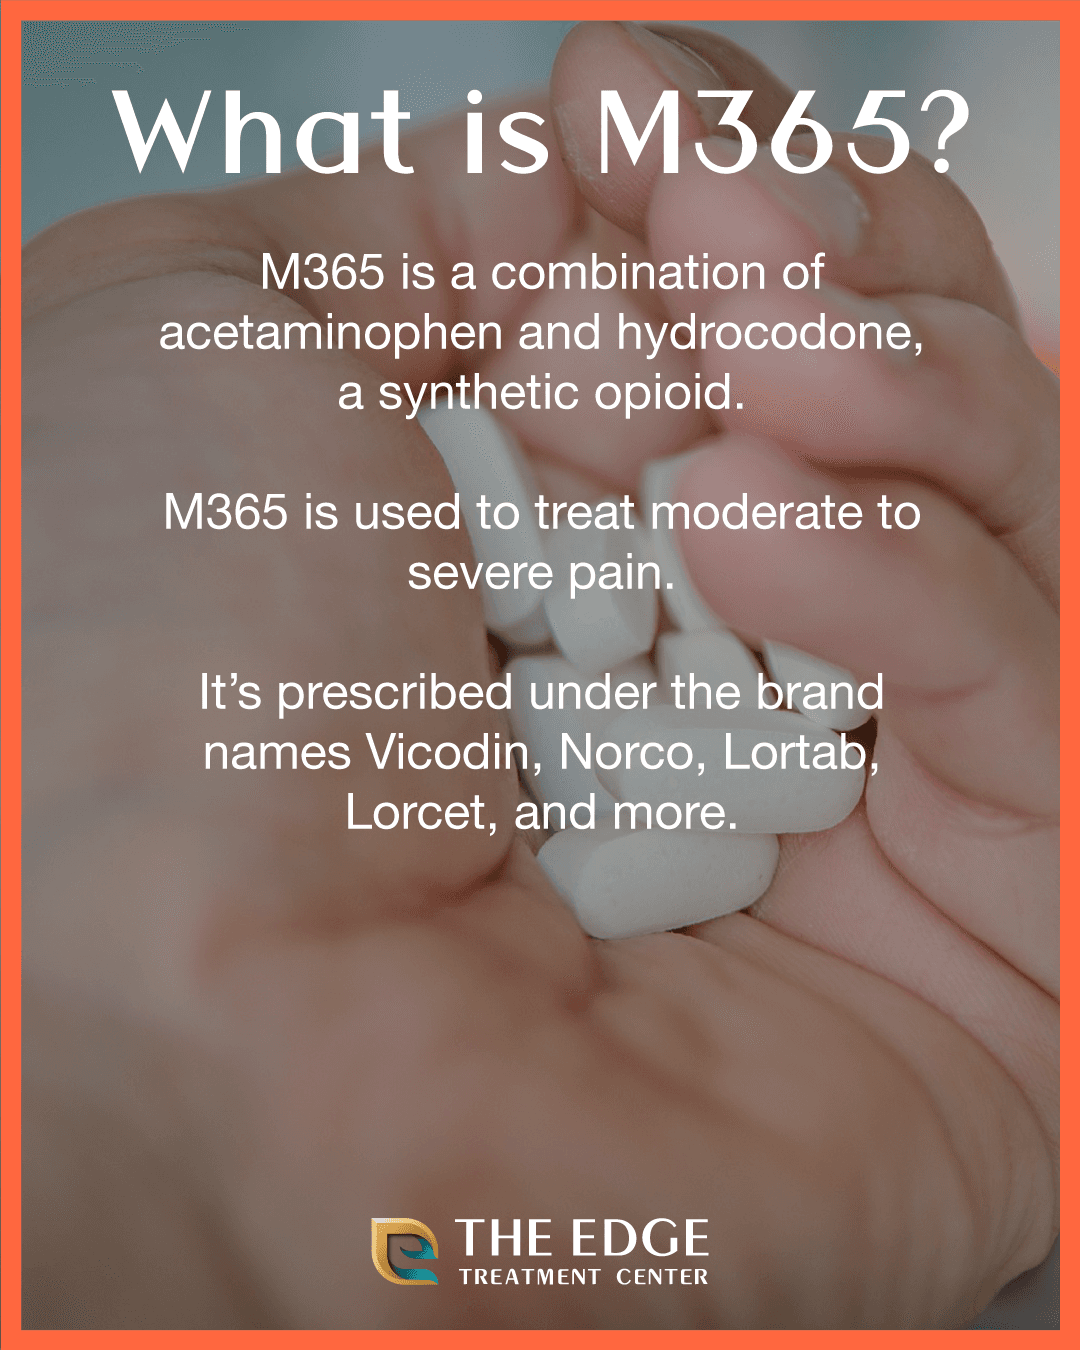 M365 Pill: What is the M365 White Oval Pill?